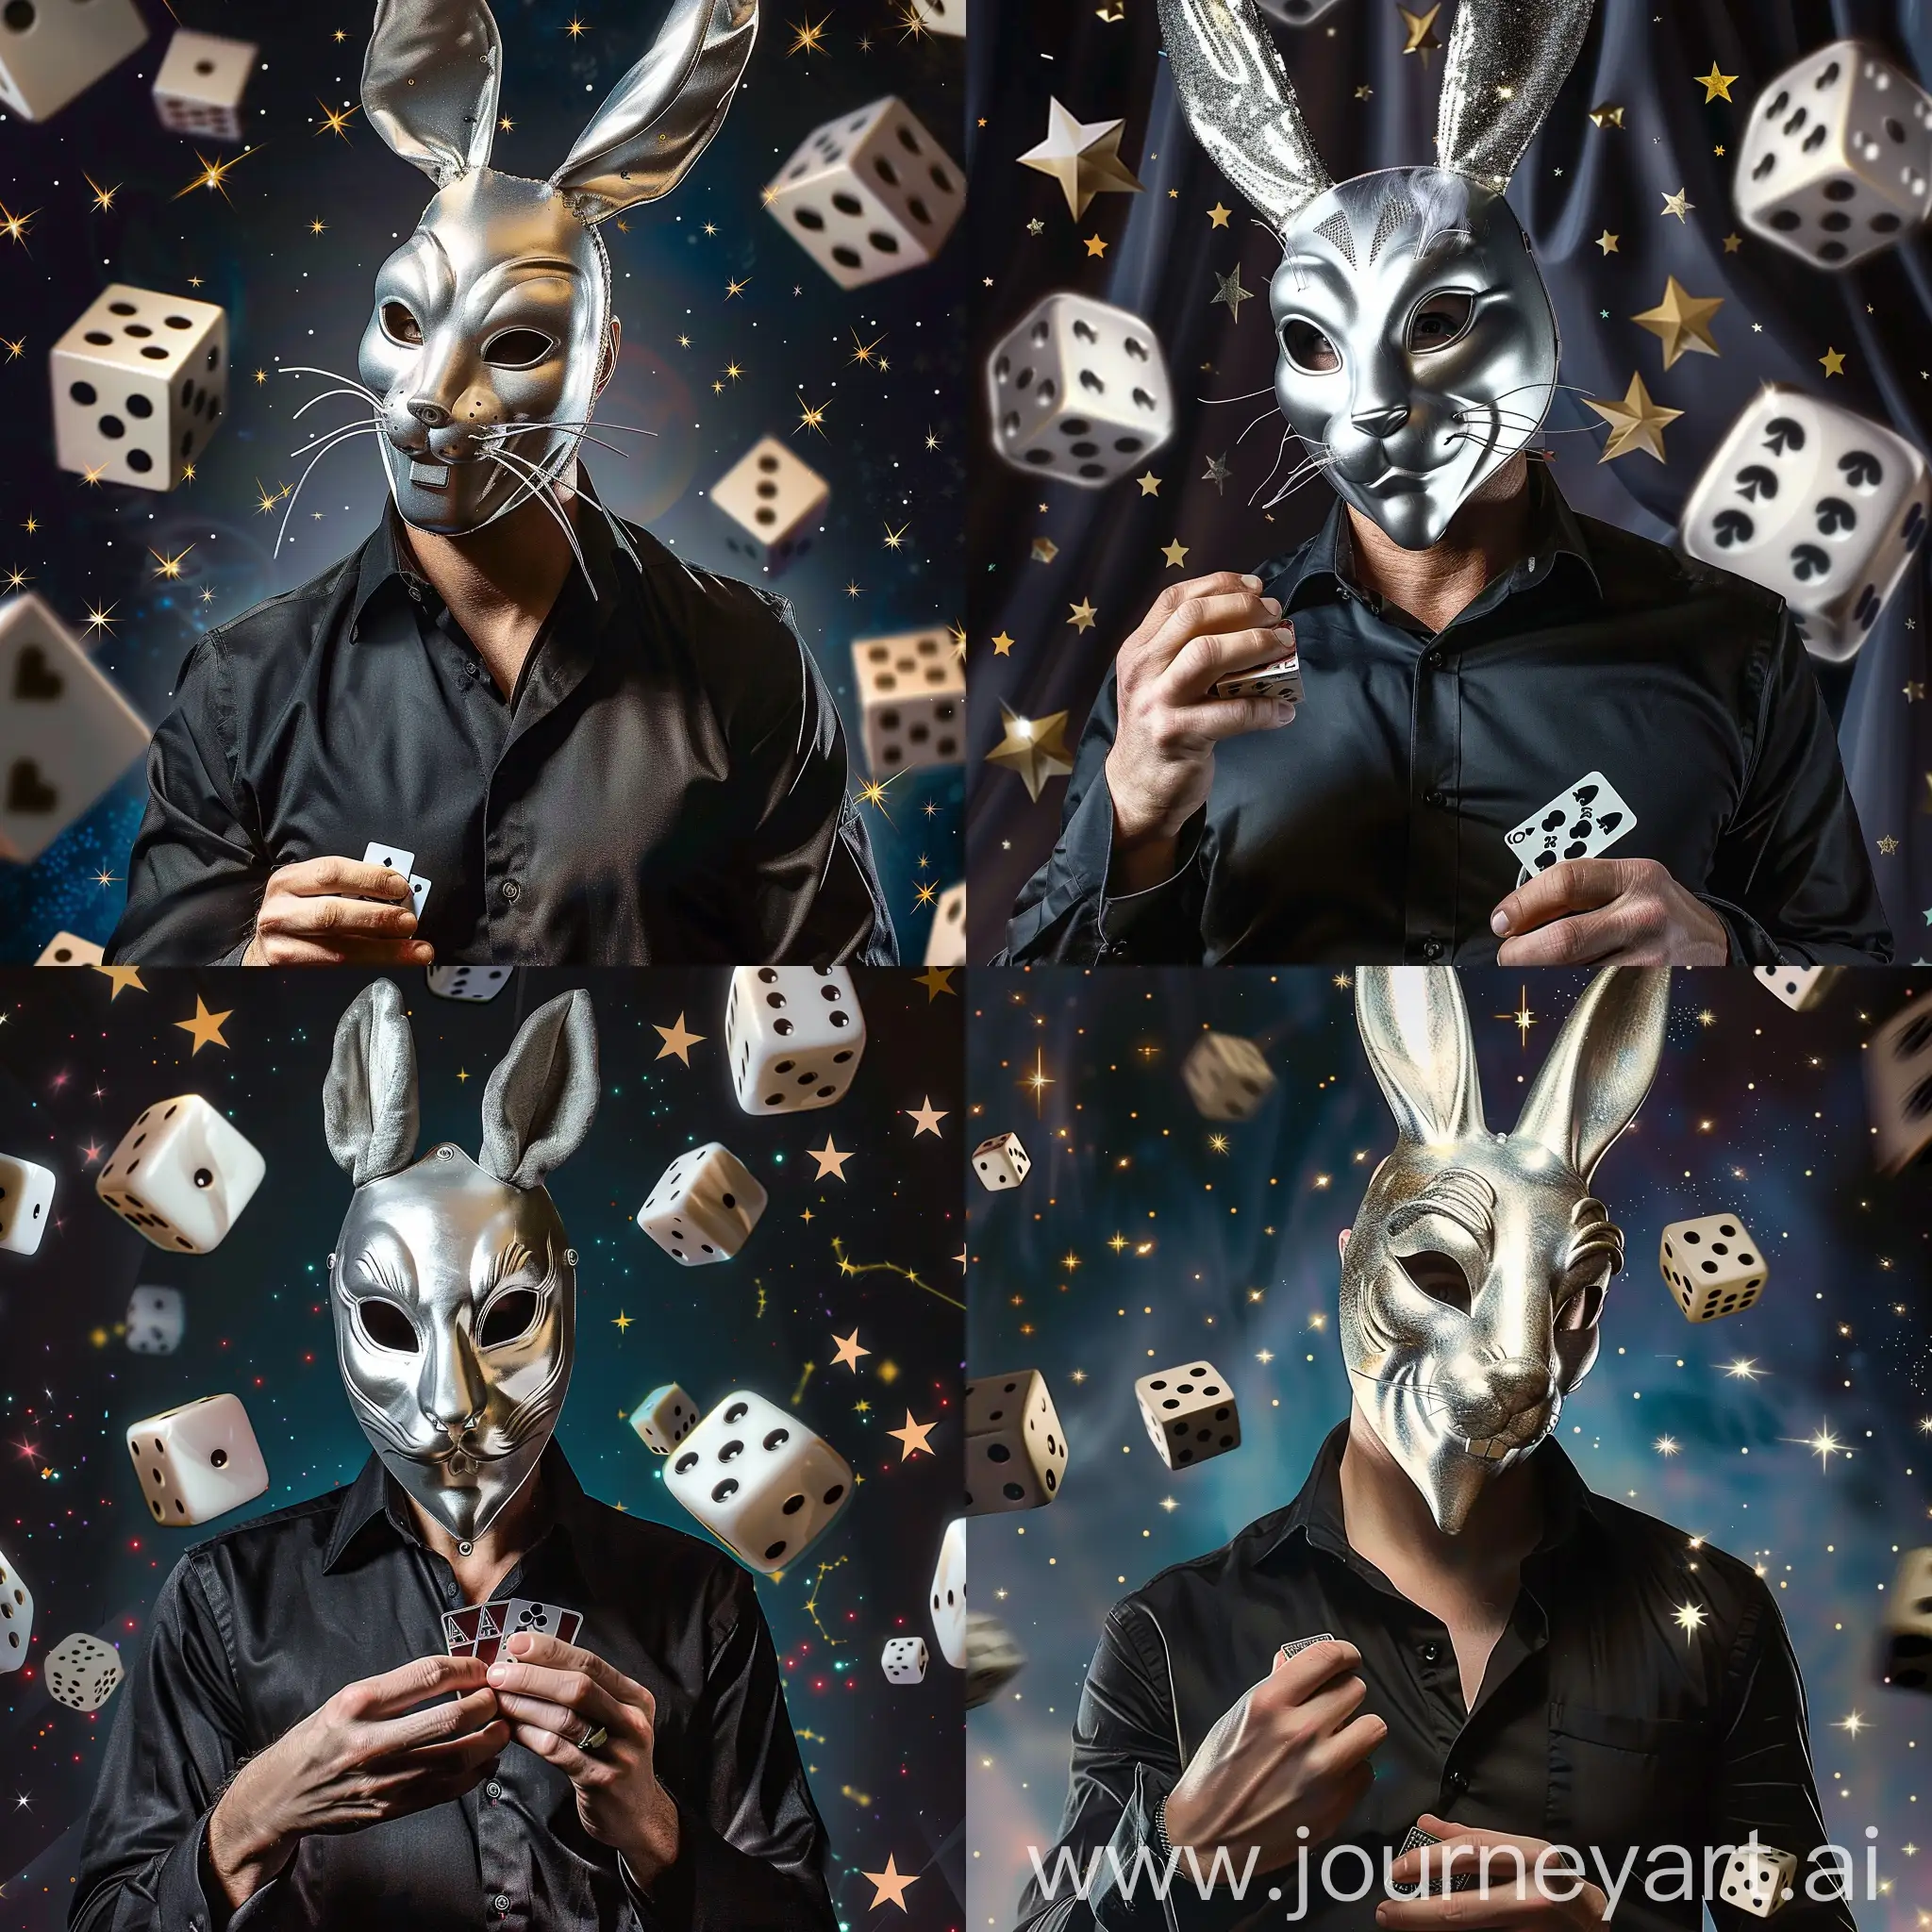 Mysterious-Gambler-in-Silver-Rabbit-Mask-Amidst-Cosmic-Dice